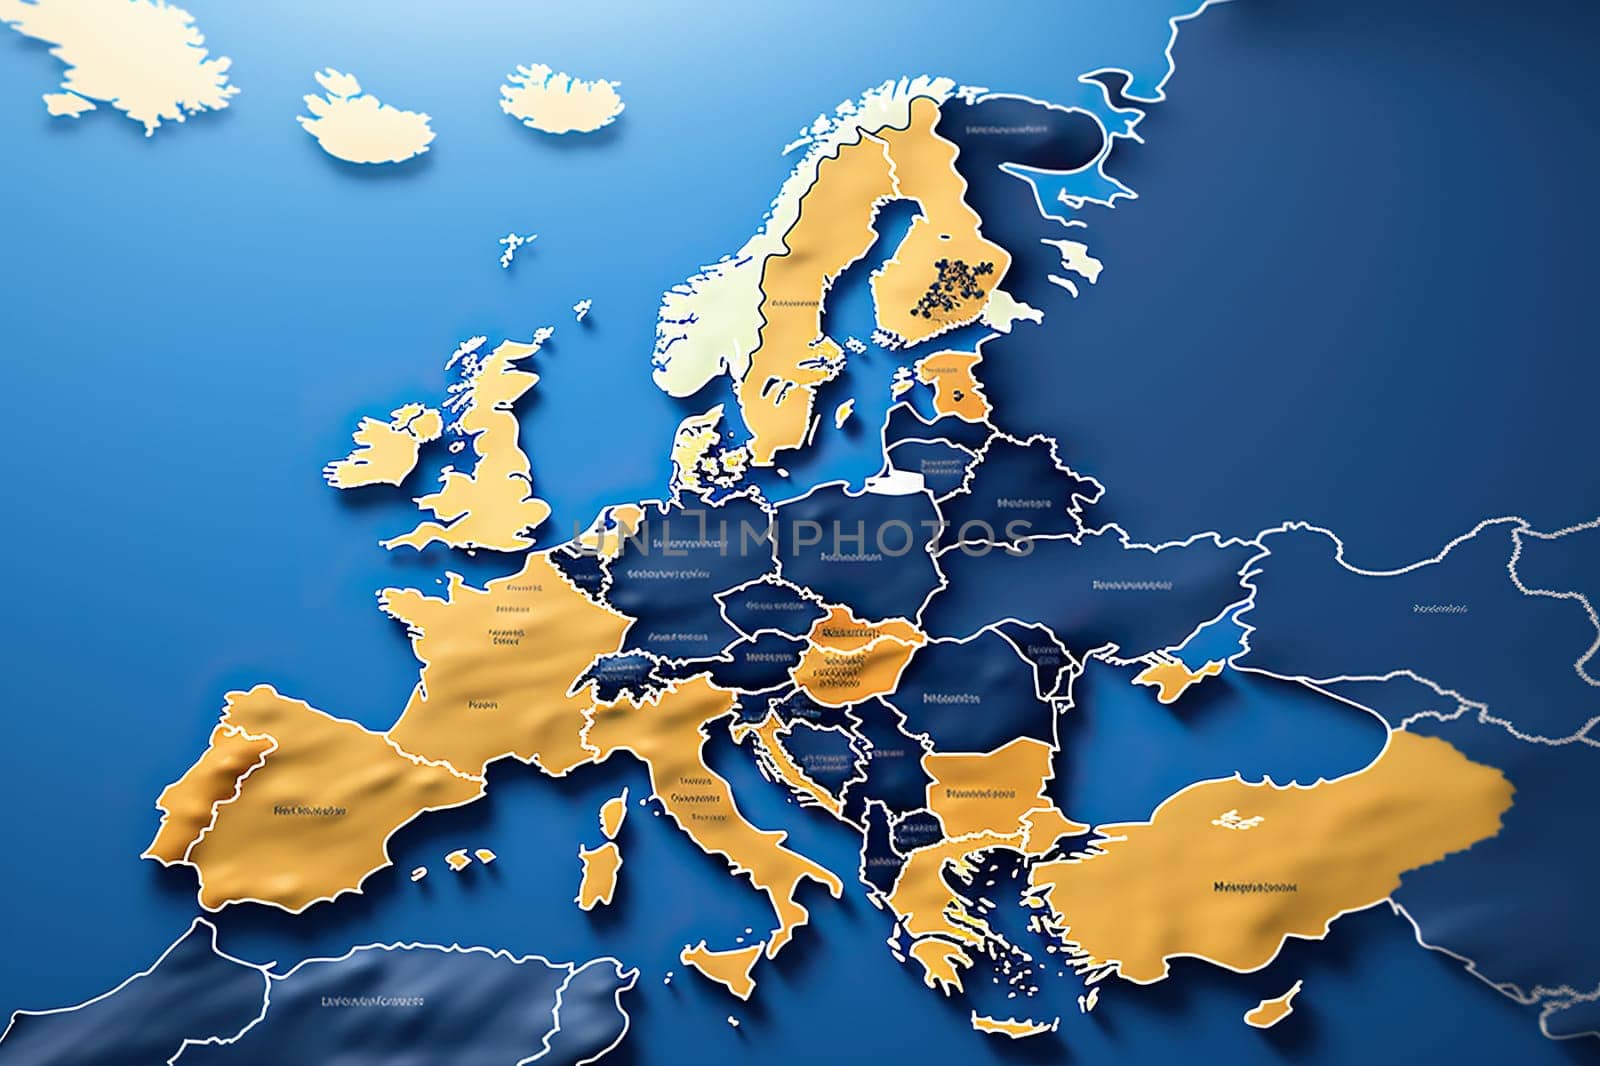 Abstract flat image of Europe map from above.